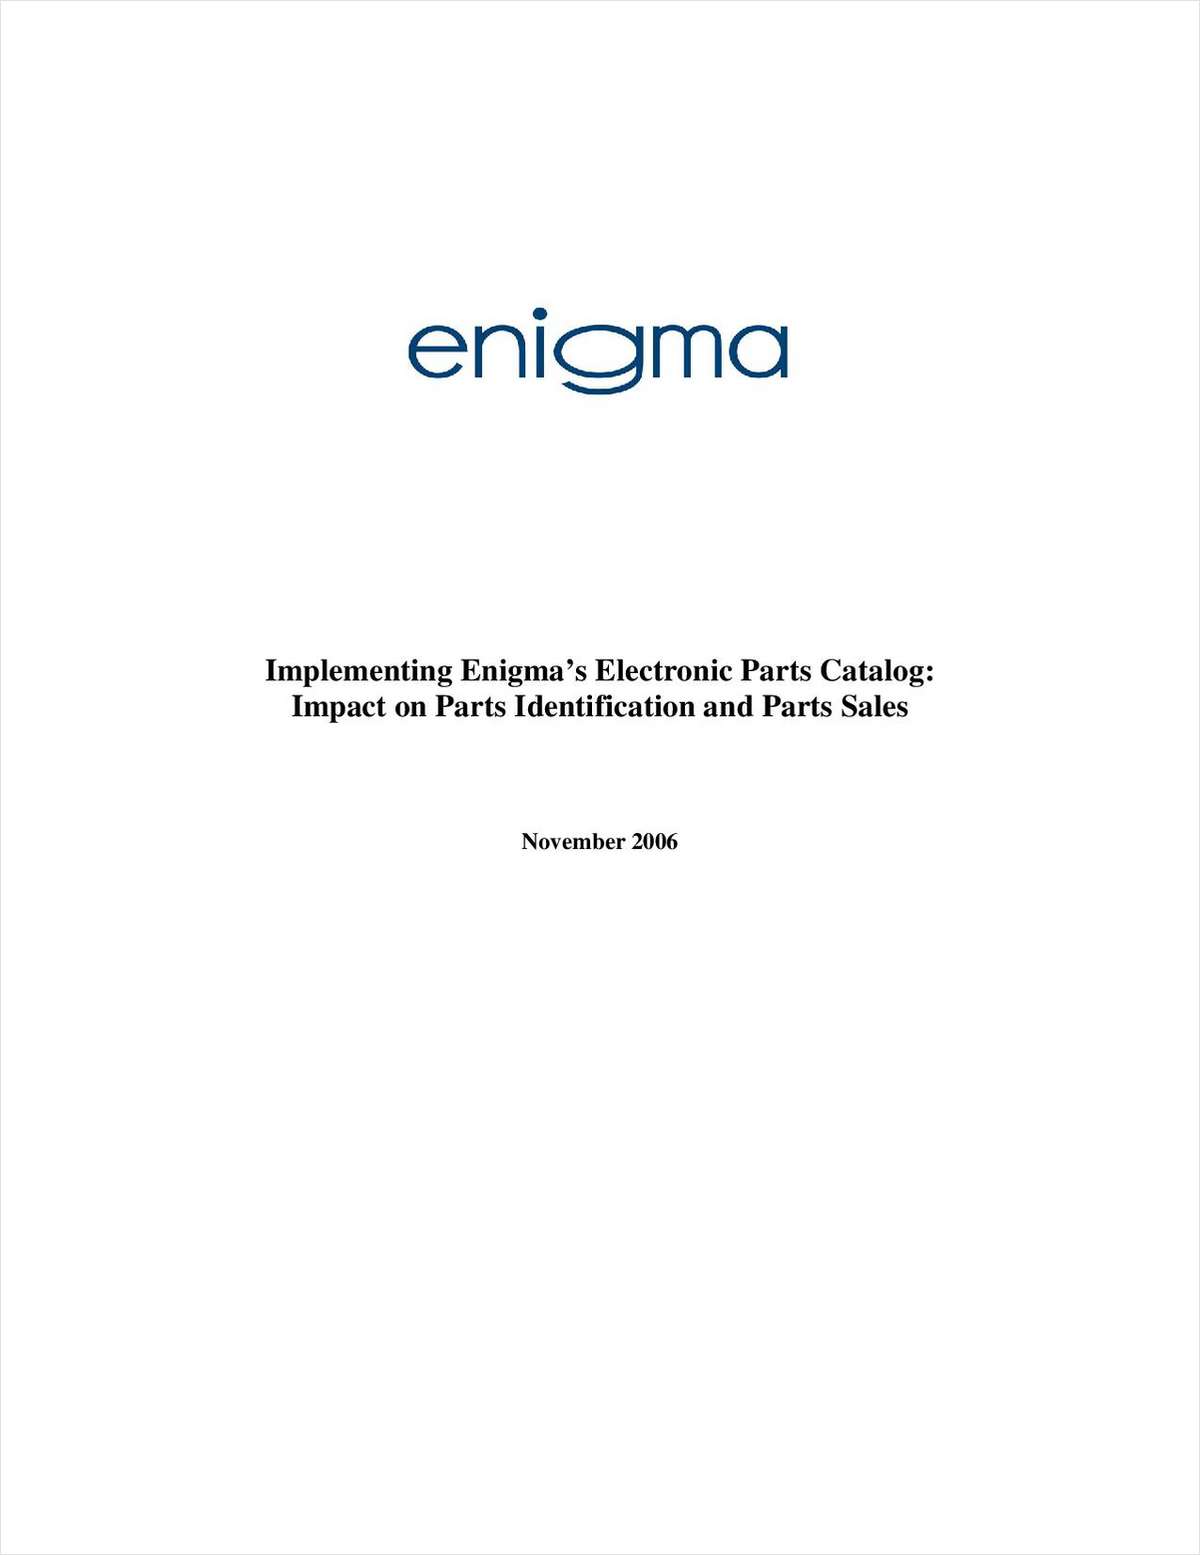 Implementing an Electronic Parts Catalog: Make Impact in the Aftermarket